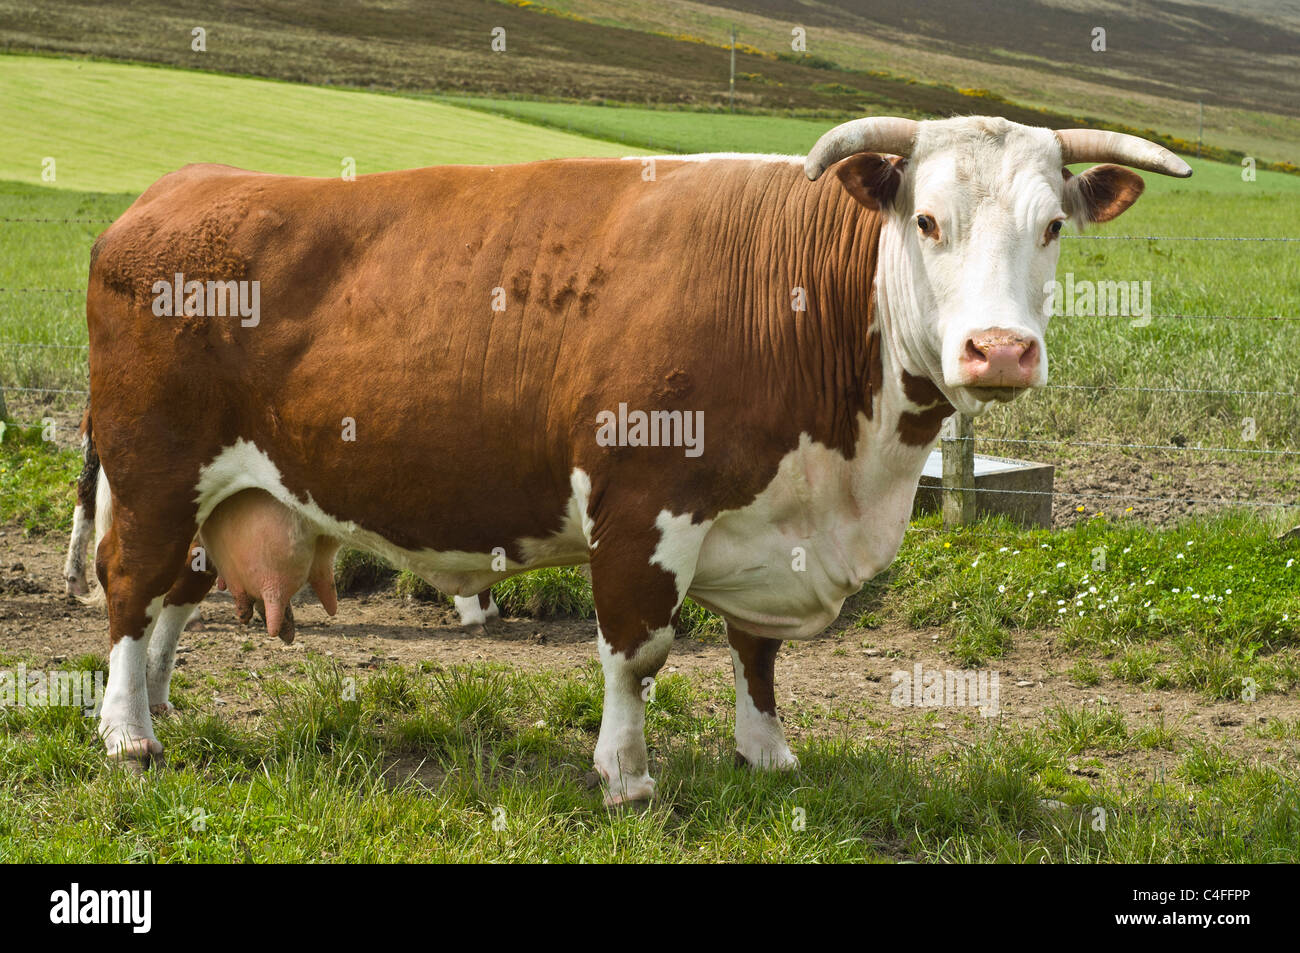 dh Hereford cow COW UK Horned brown white beef cow british agricultural farm cows animal Stock Photo